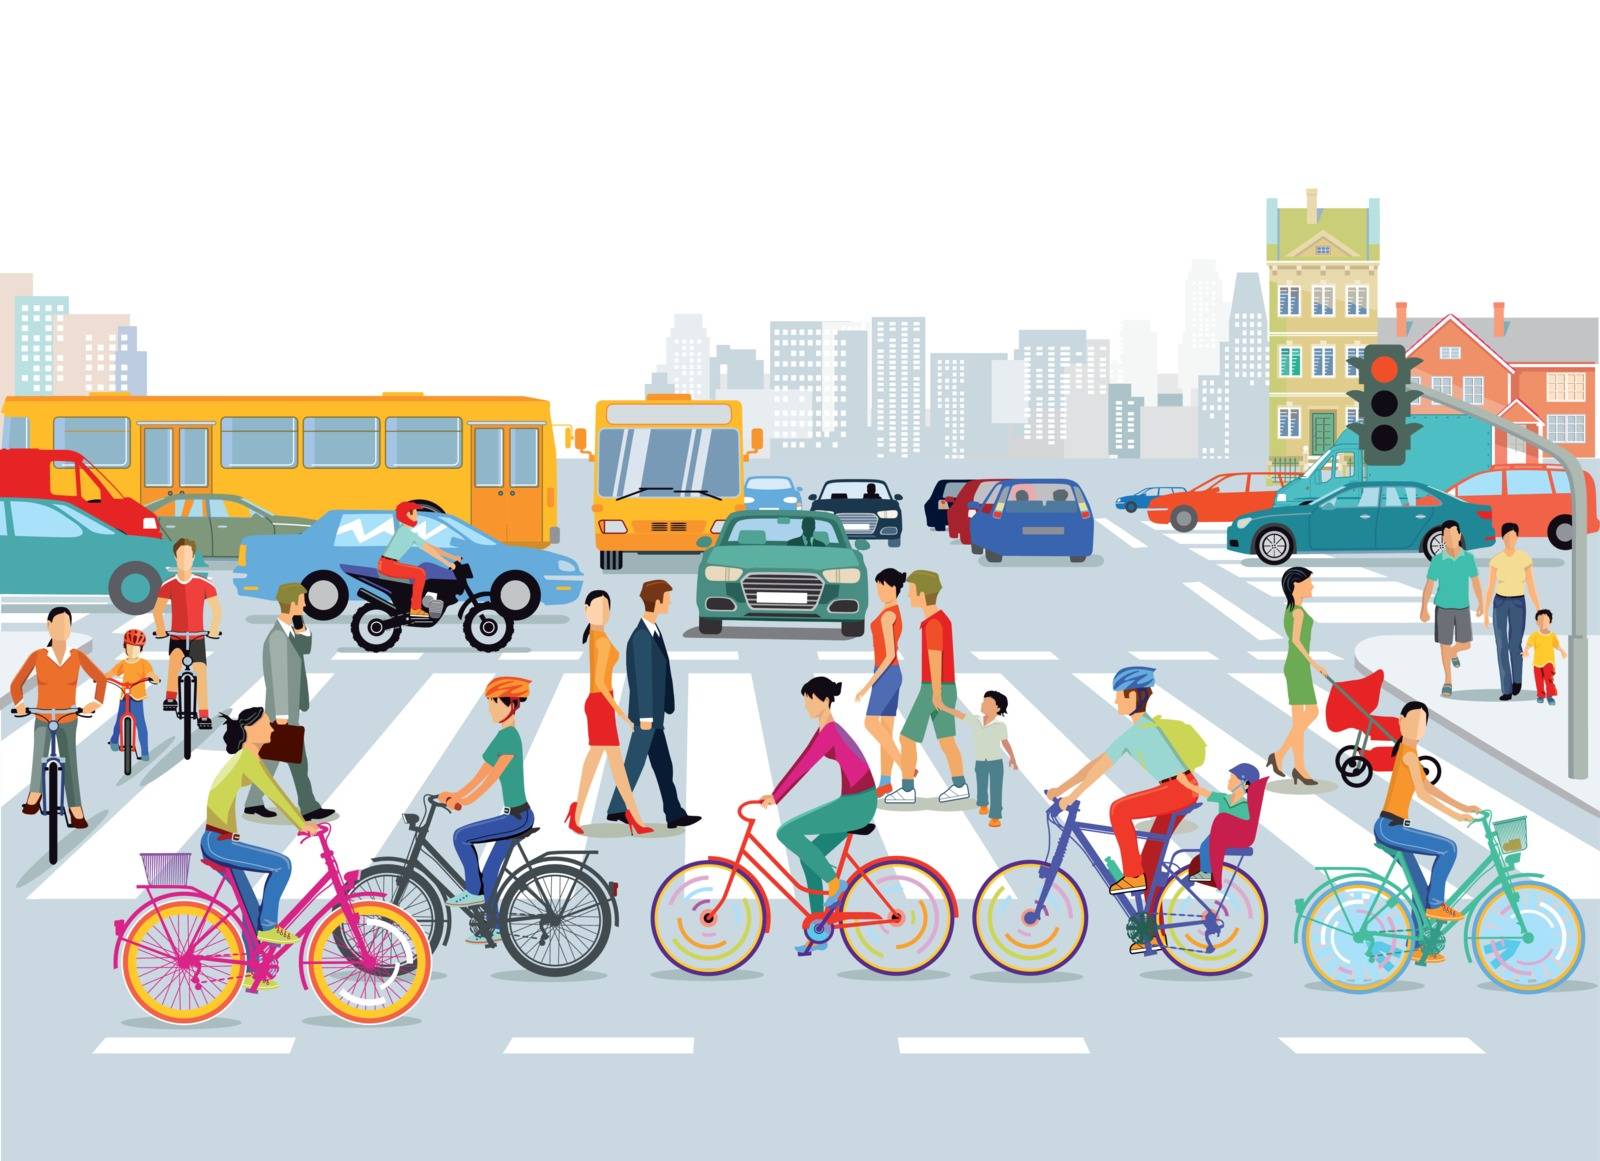 City with road traffic, cyclists and pedestrians, illustration